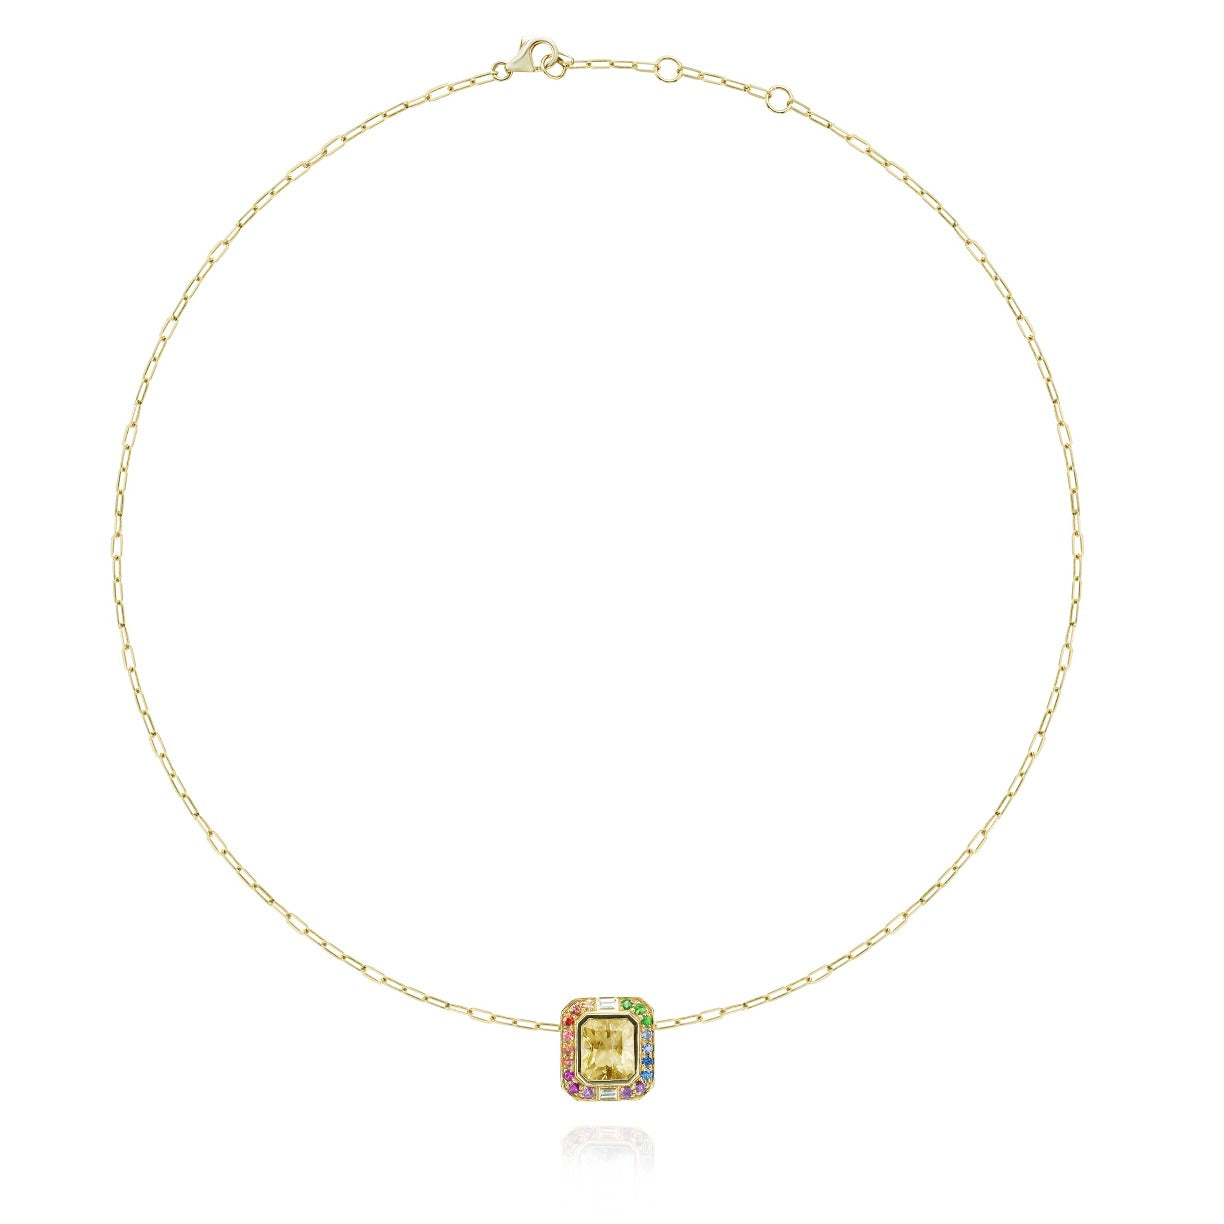 Margareth necklace special 18 carat gold, heliodor, rainbow sapphire and diamonds.